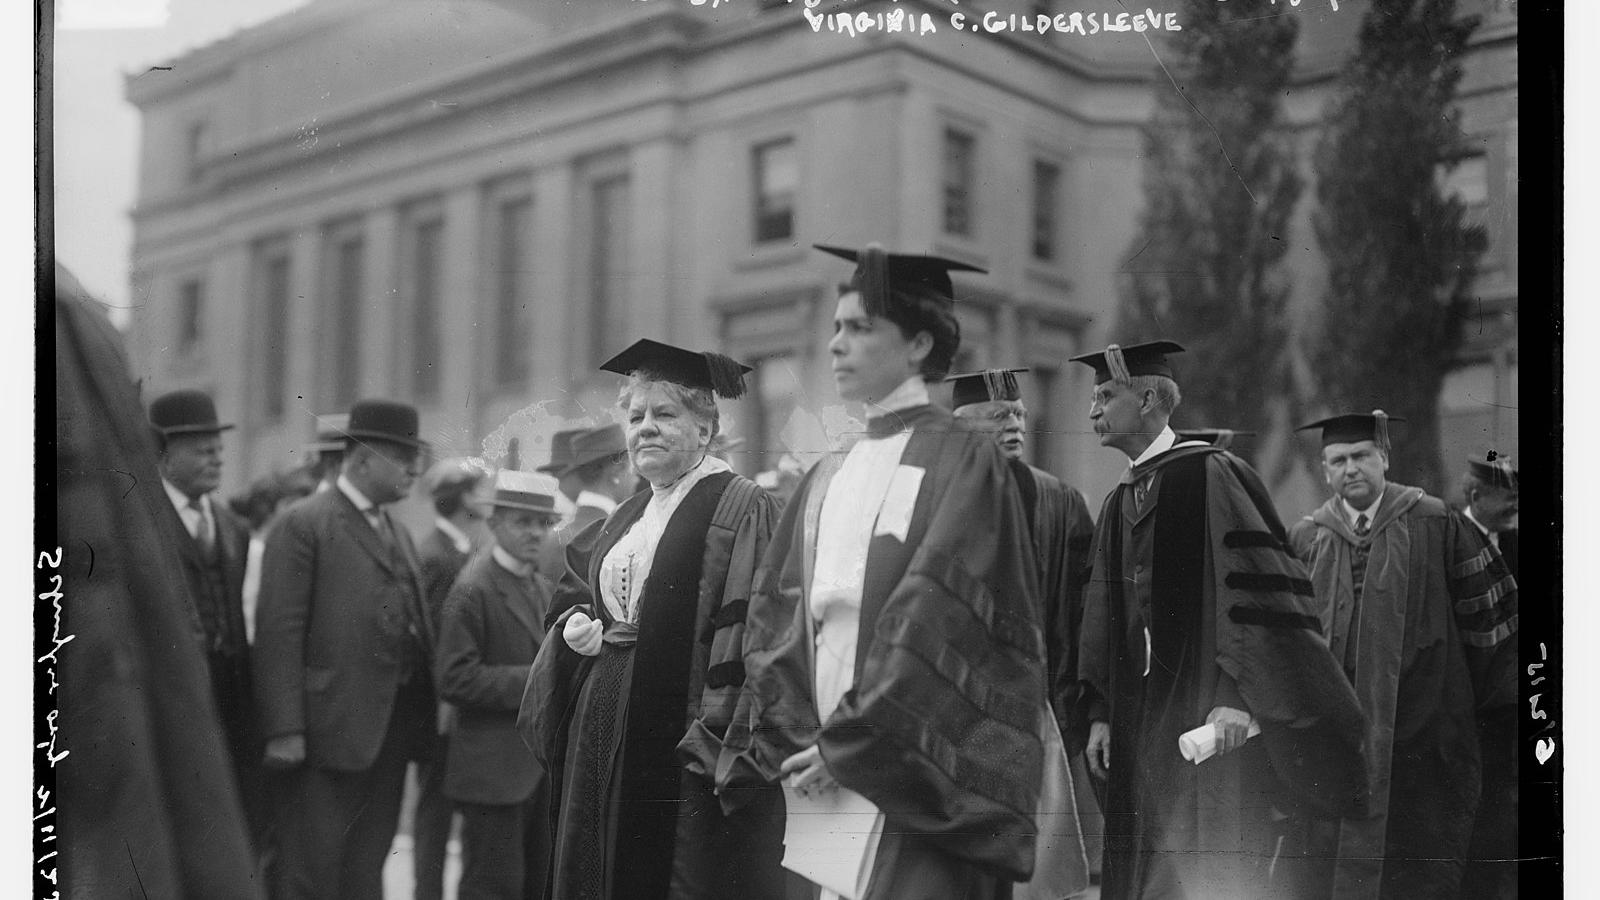 Gildersleeve stands with other faculty and administration members during a Columbia commencement event. Low Library can be seen in the background 